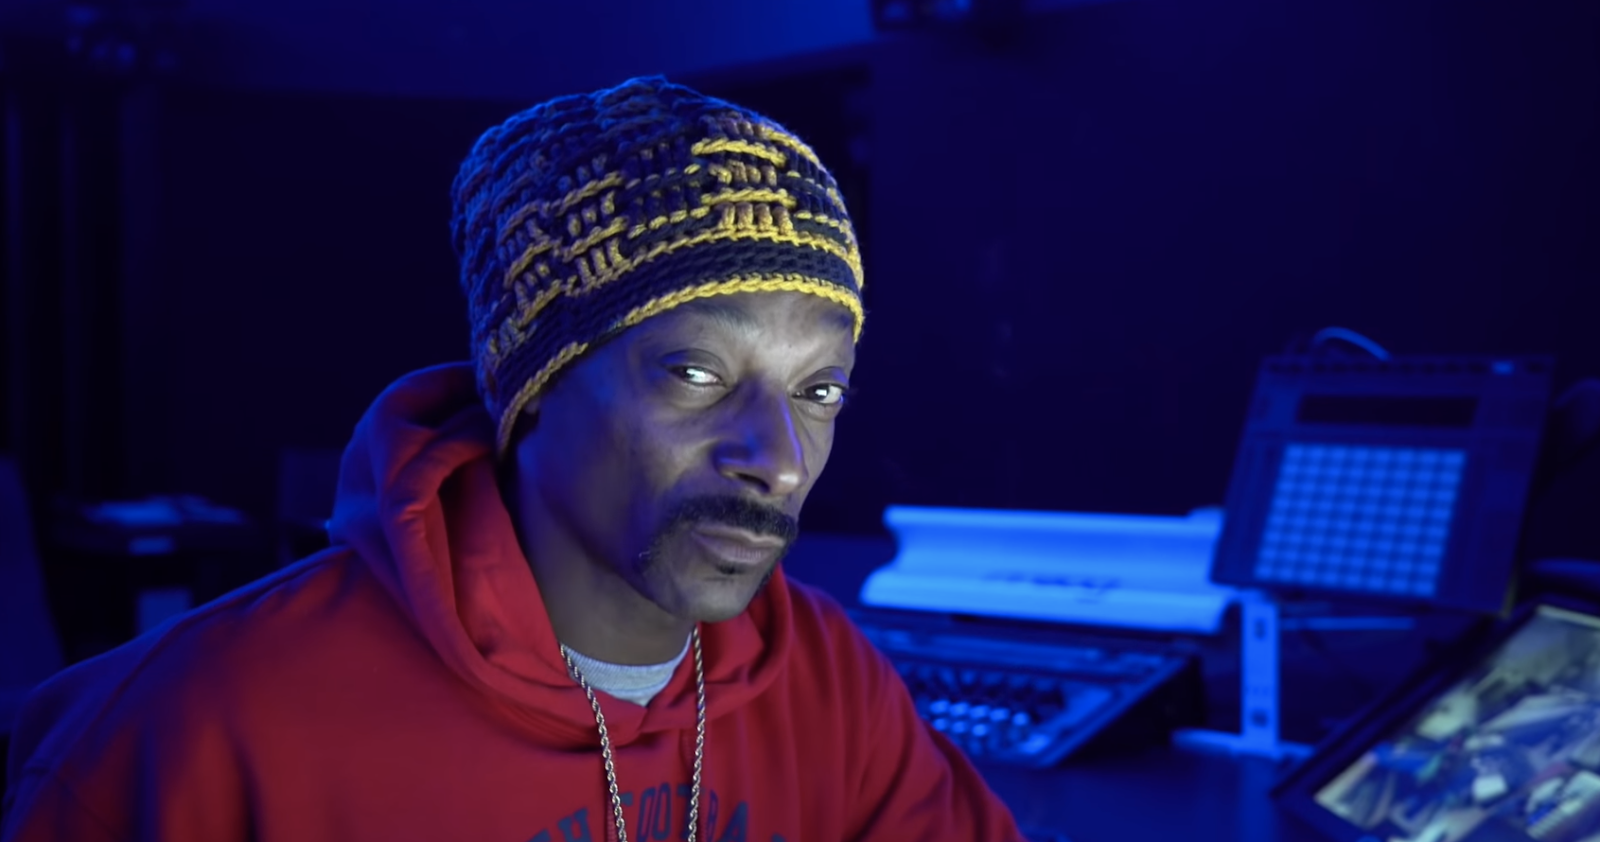 Over the weekend OG rapper Snoop Dog claimed he was producing a TV show cal...